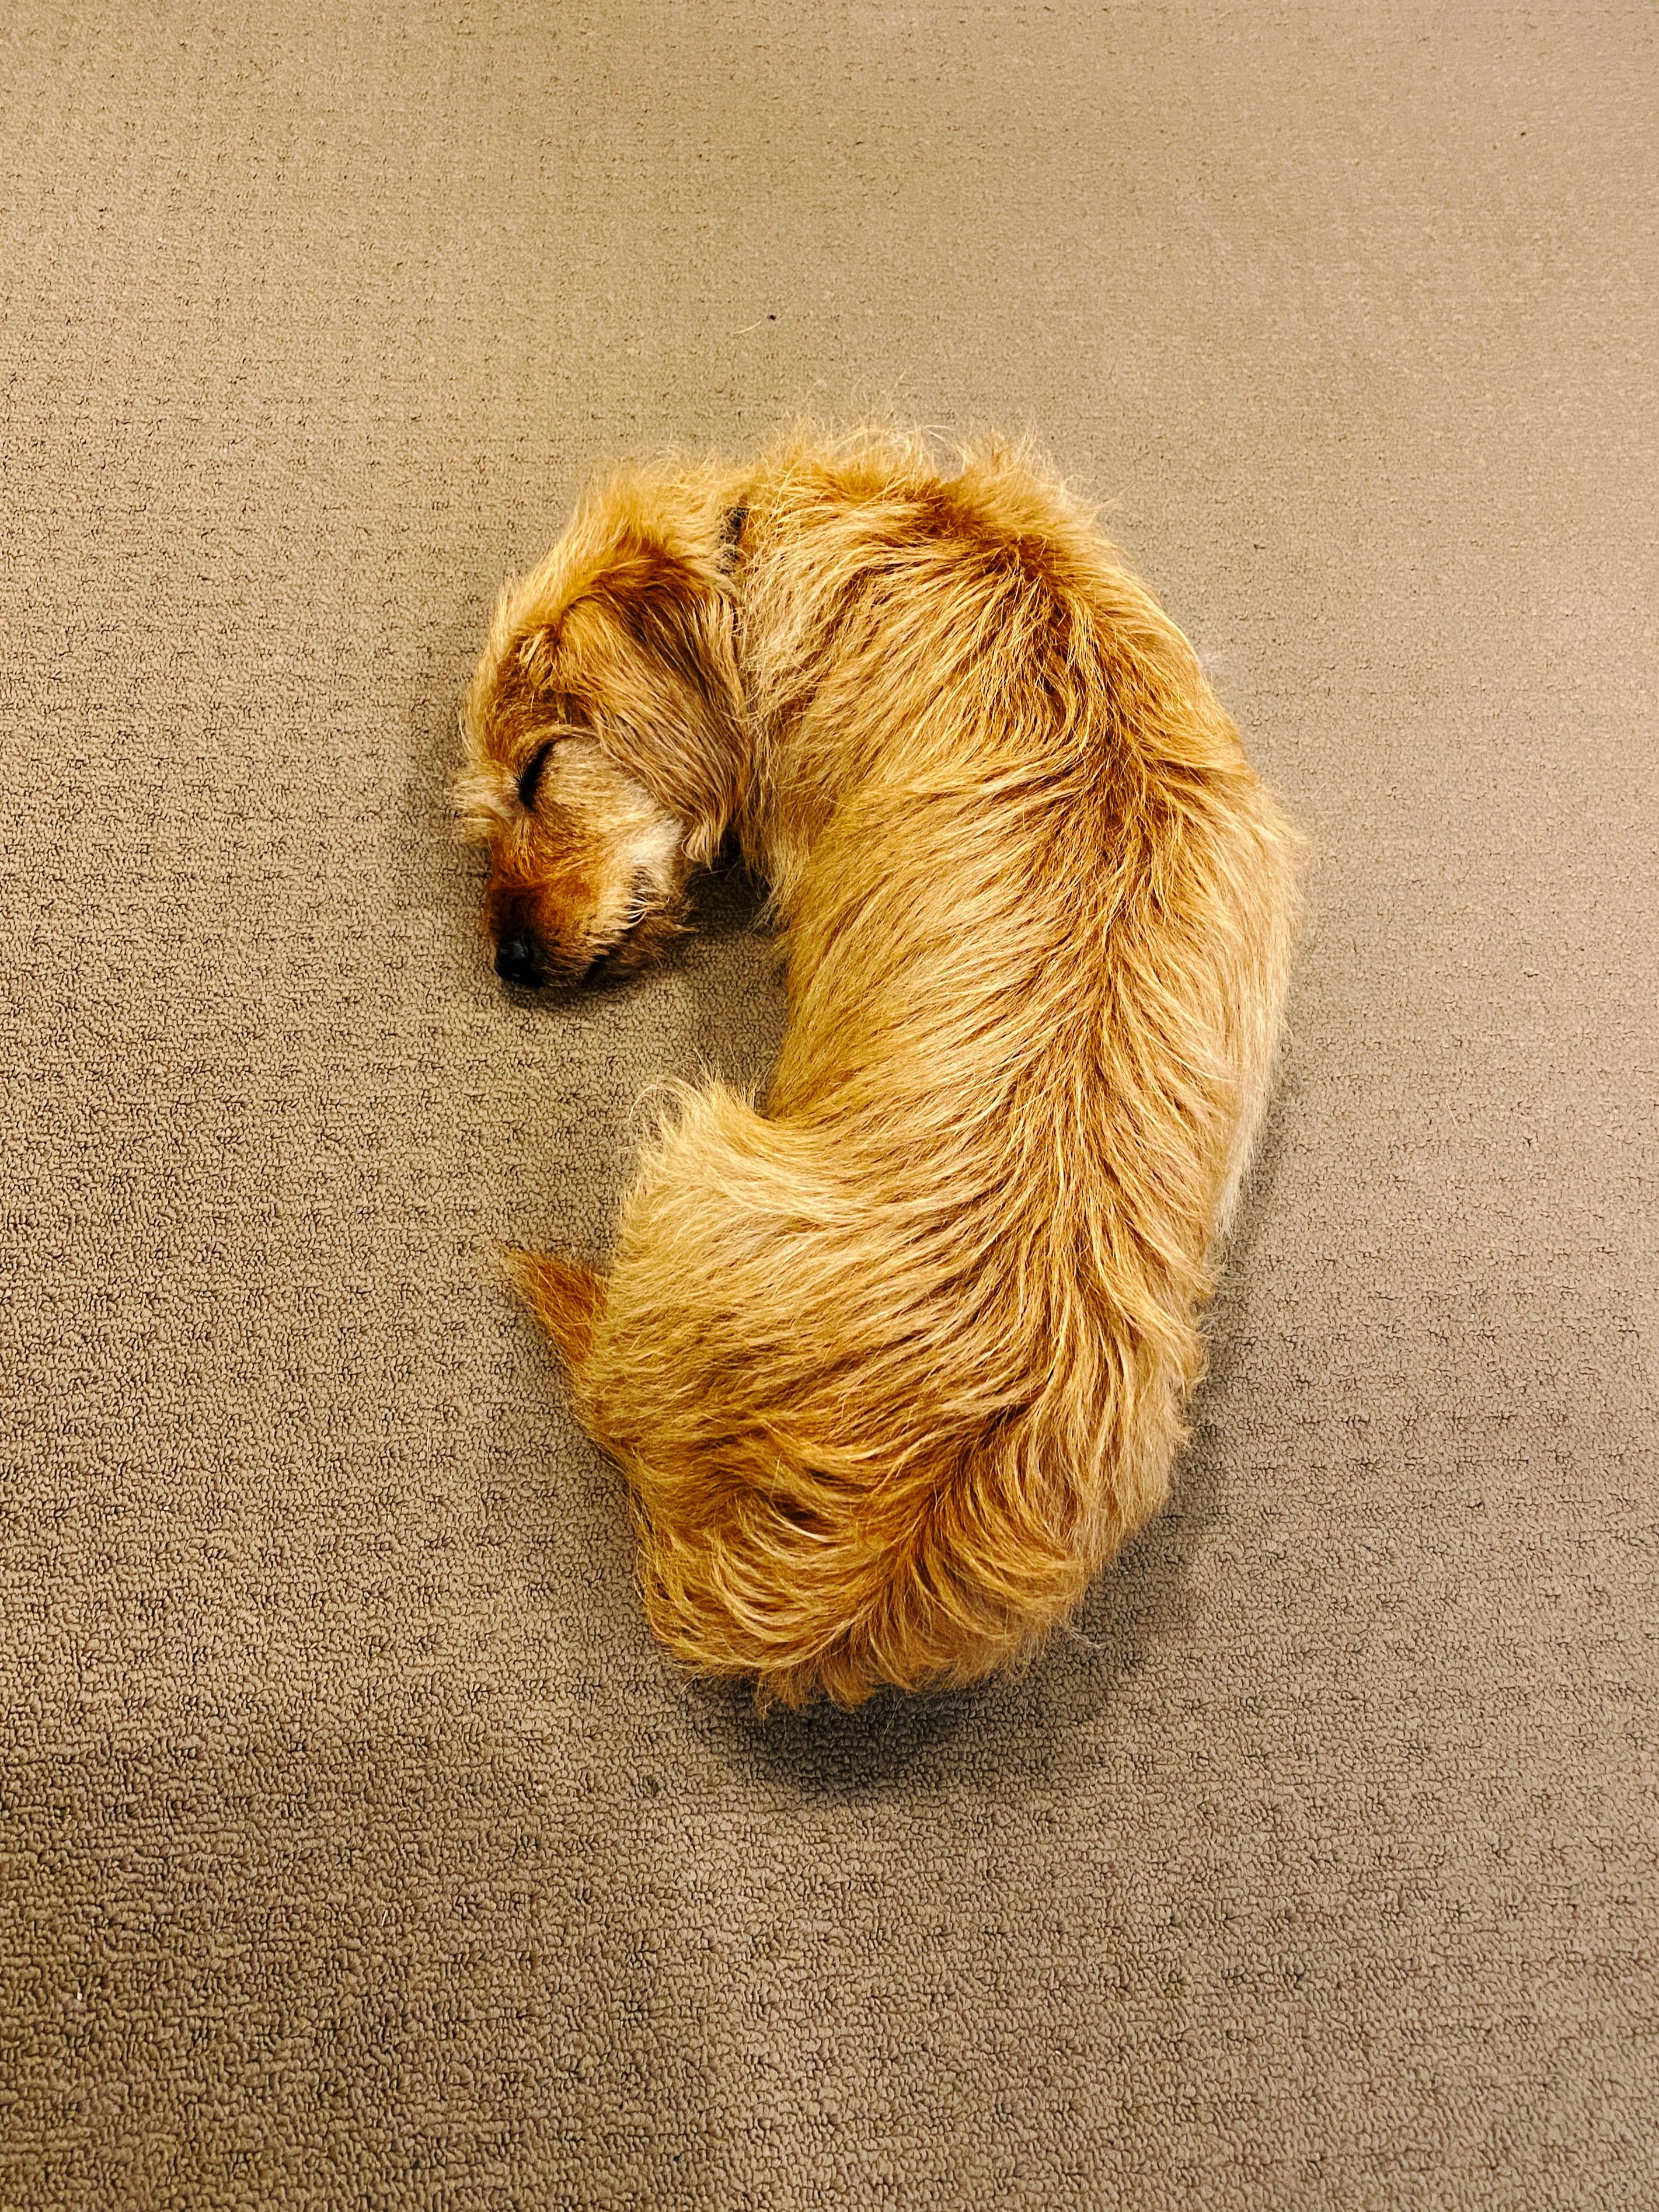 A photo of a small scruffy blonde dog lying half curled up on the floor, fast asleep.